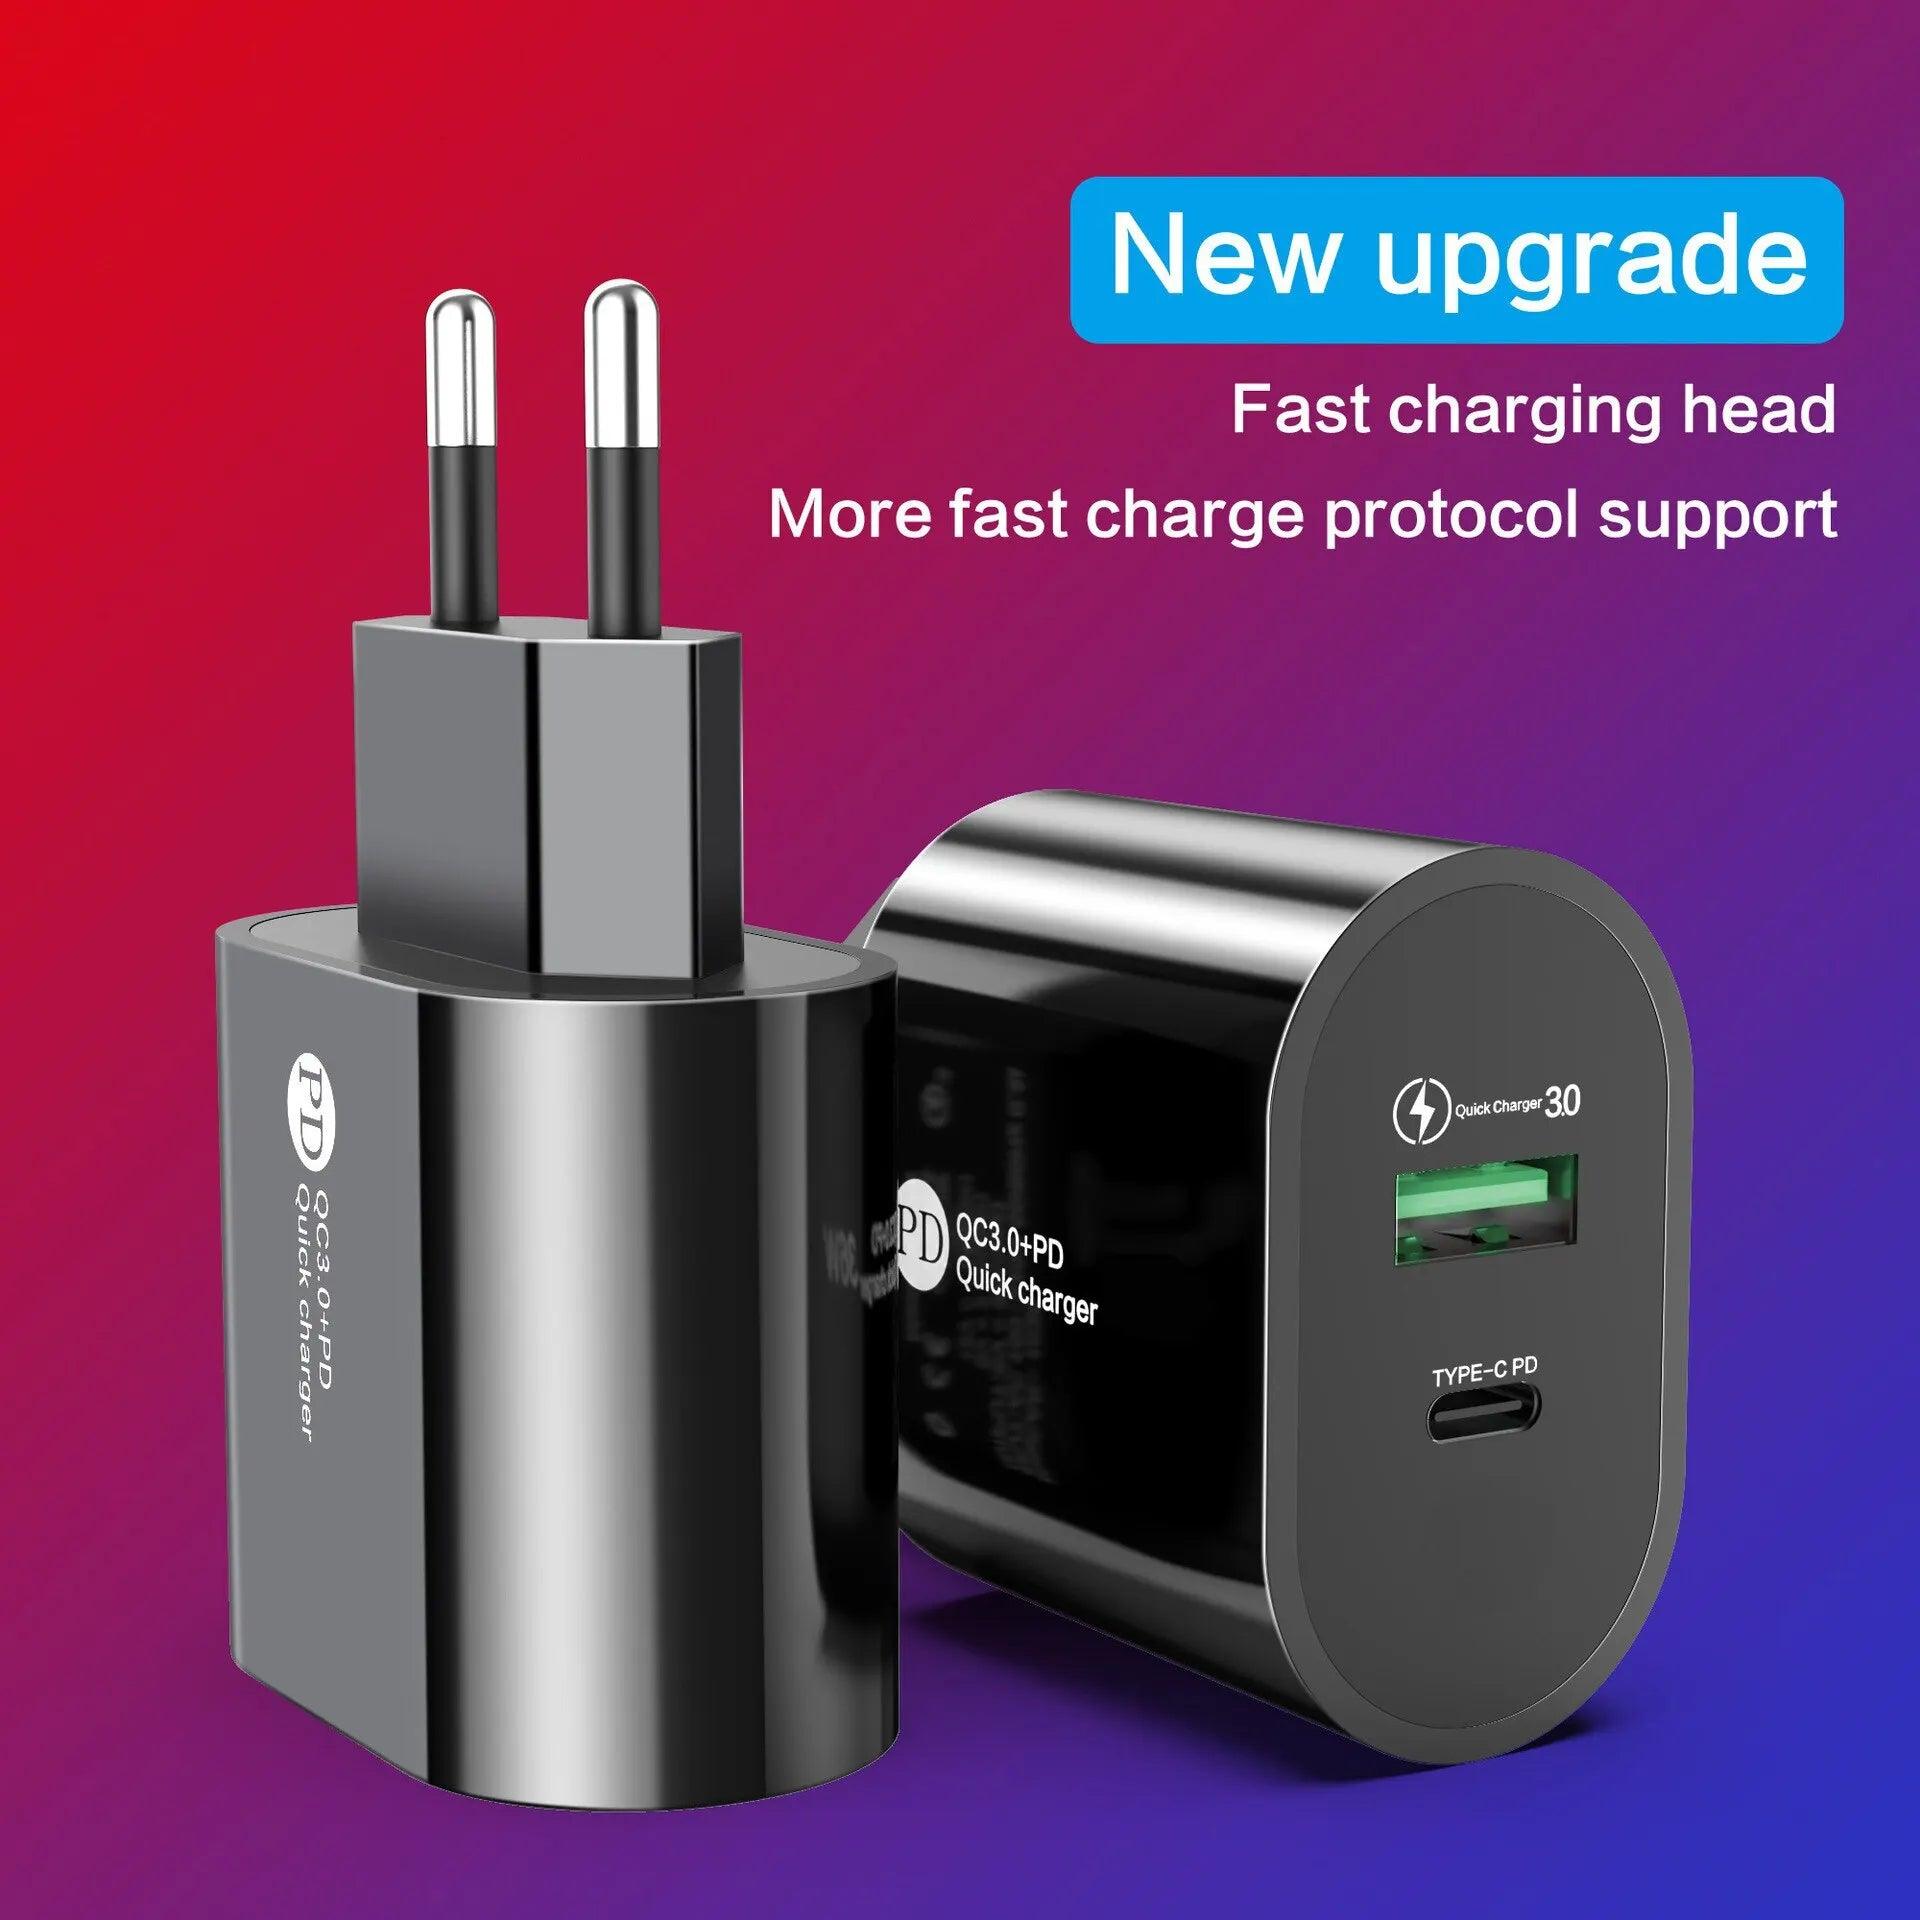 36W USB Wall Charger with Quick Charge 3.0 for iPhone 13, Samsung, Huawei - CE Certified  ourlum.com   